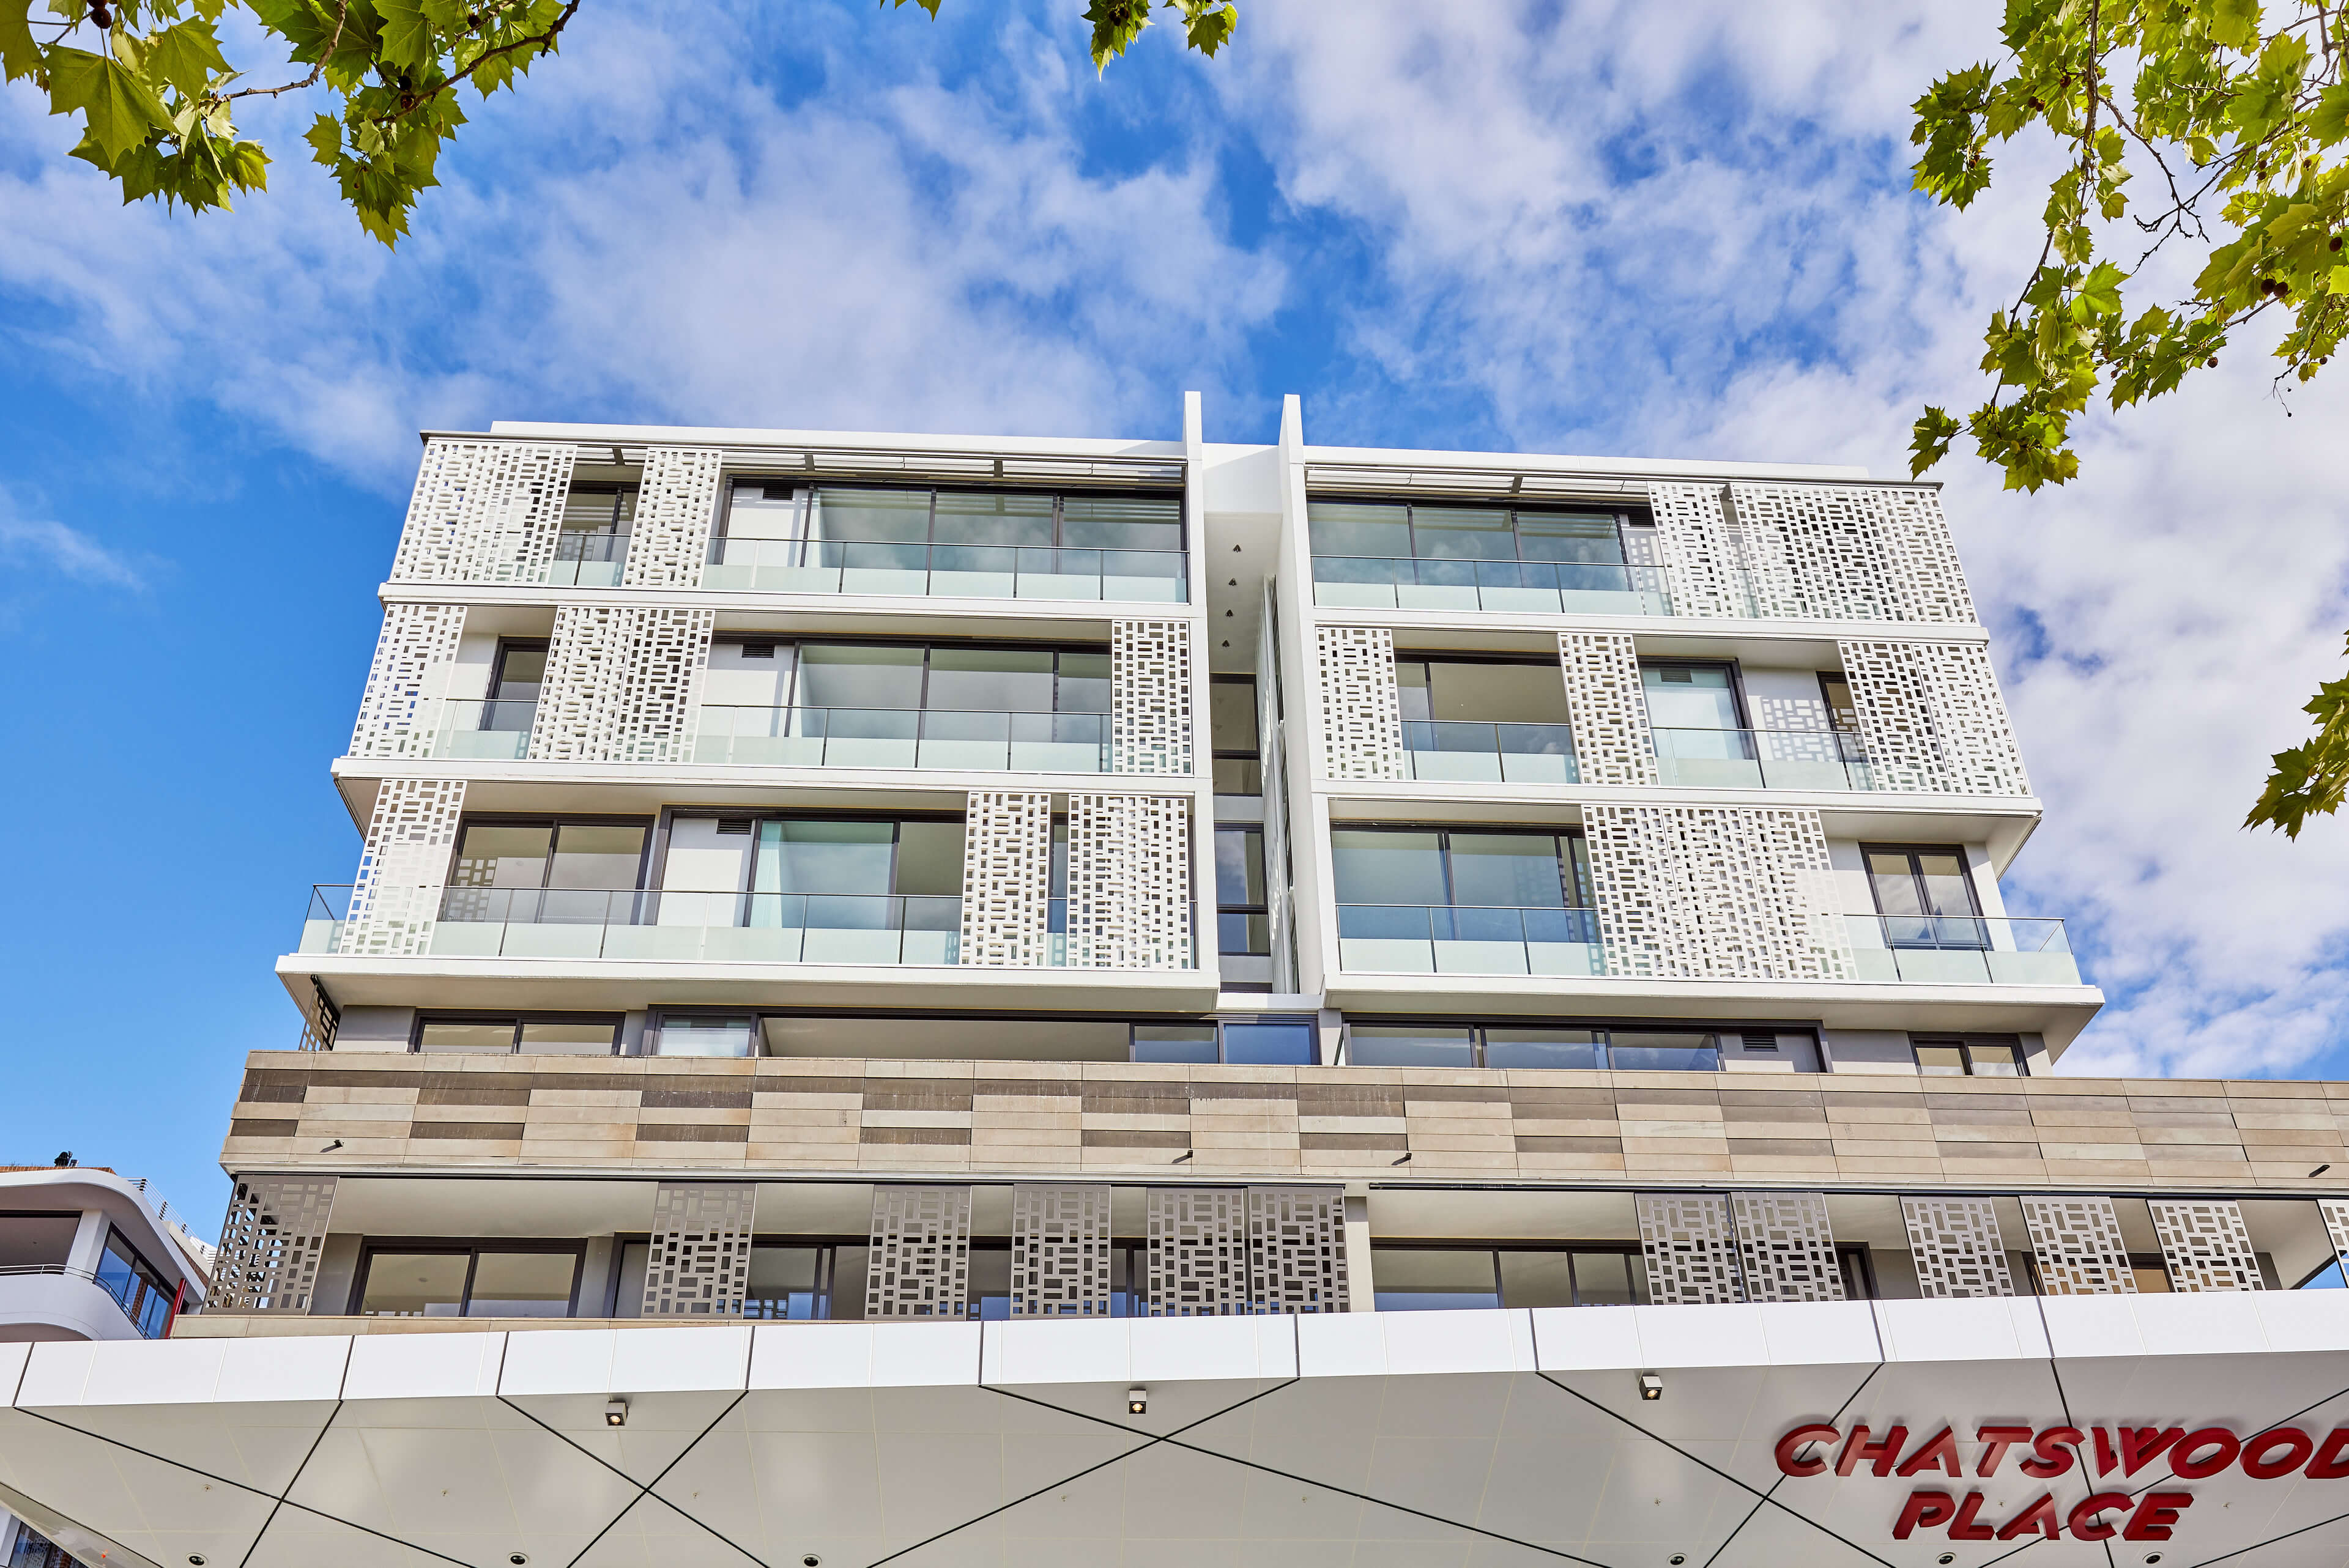 18 apartment facade detail at chatswood place taylor construction residential